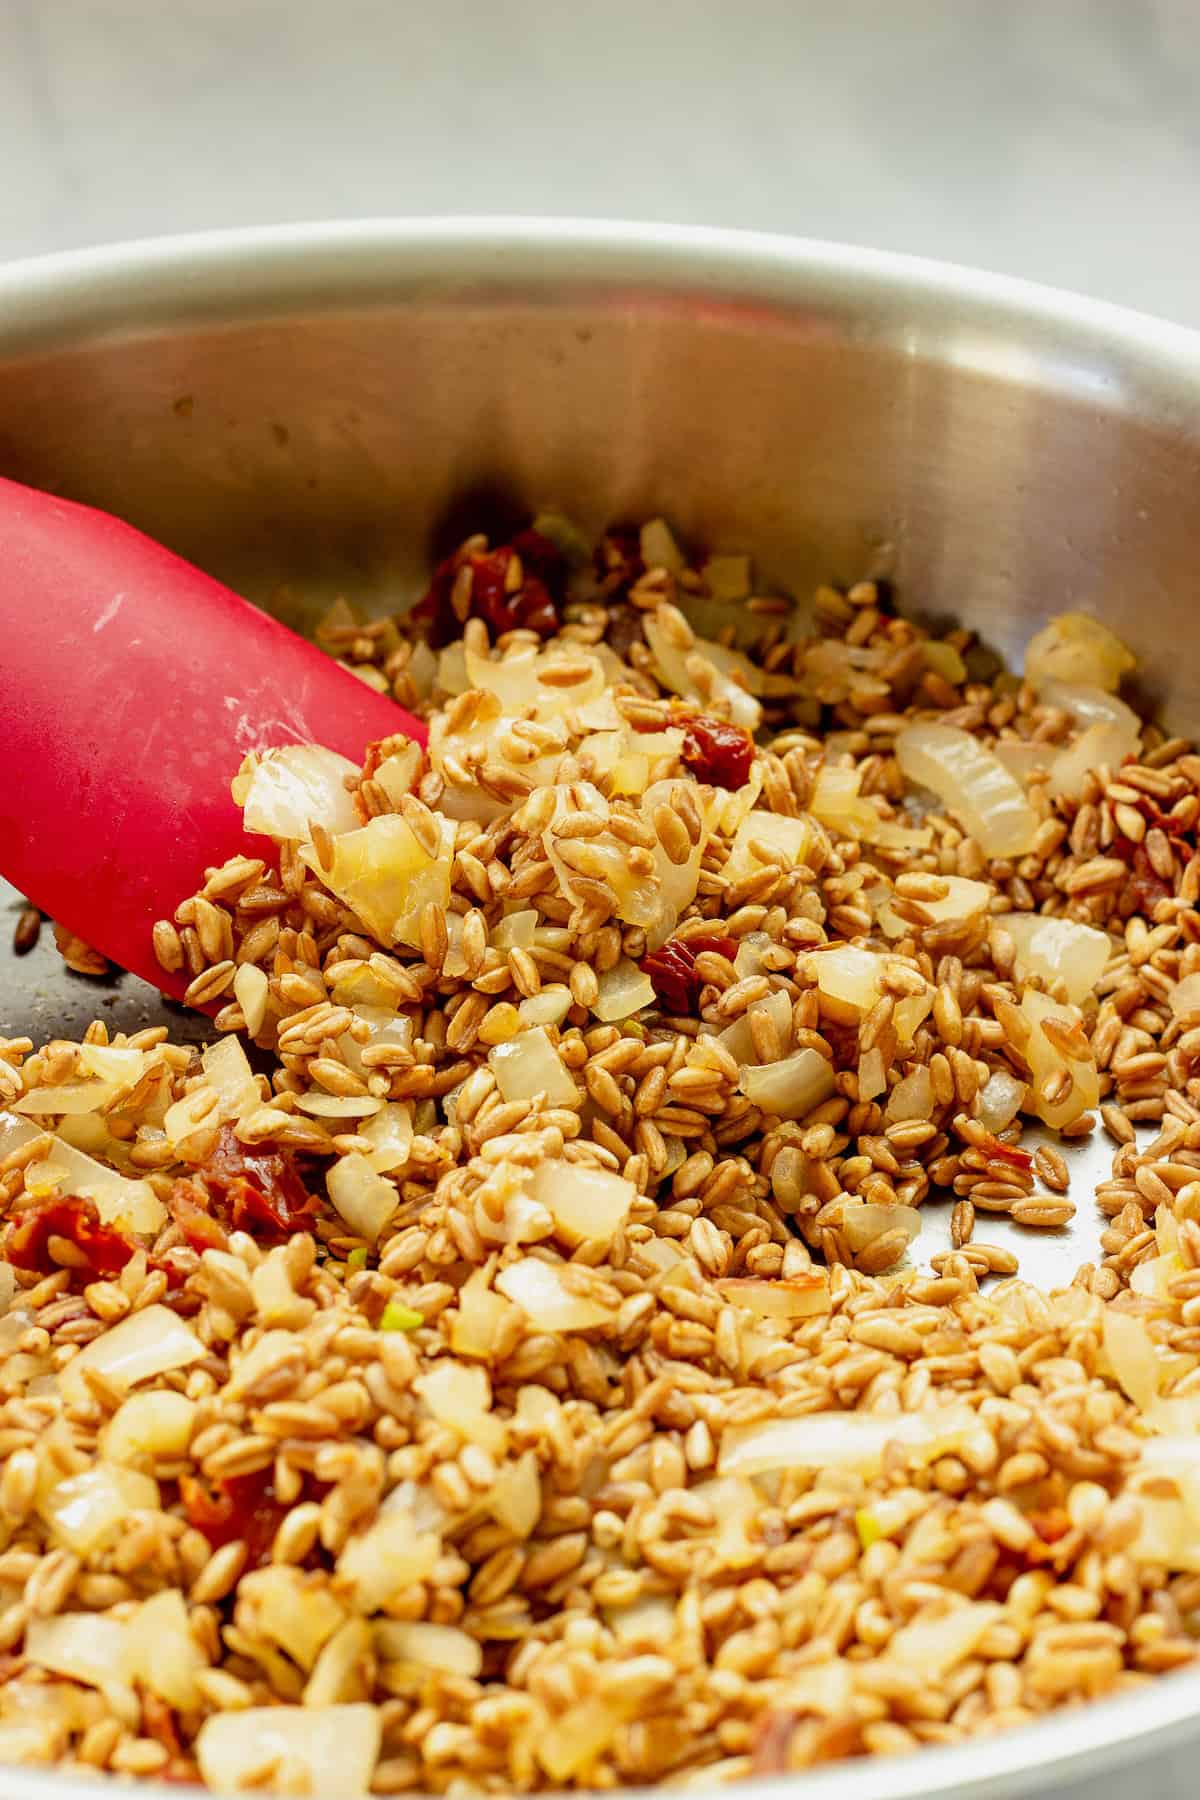 A saute pan and red spatula stirring a mixture of farro, onions, garlic, and sun-dried tomatoes.